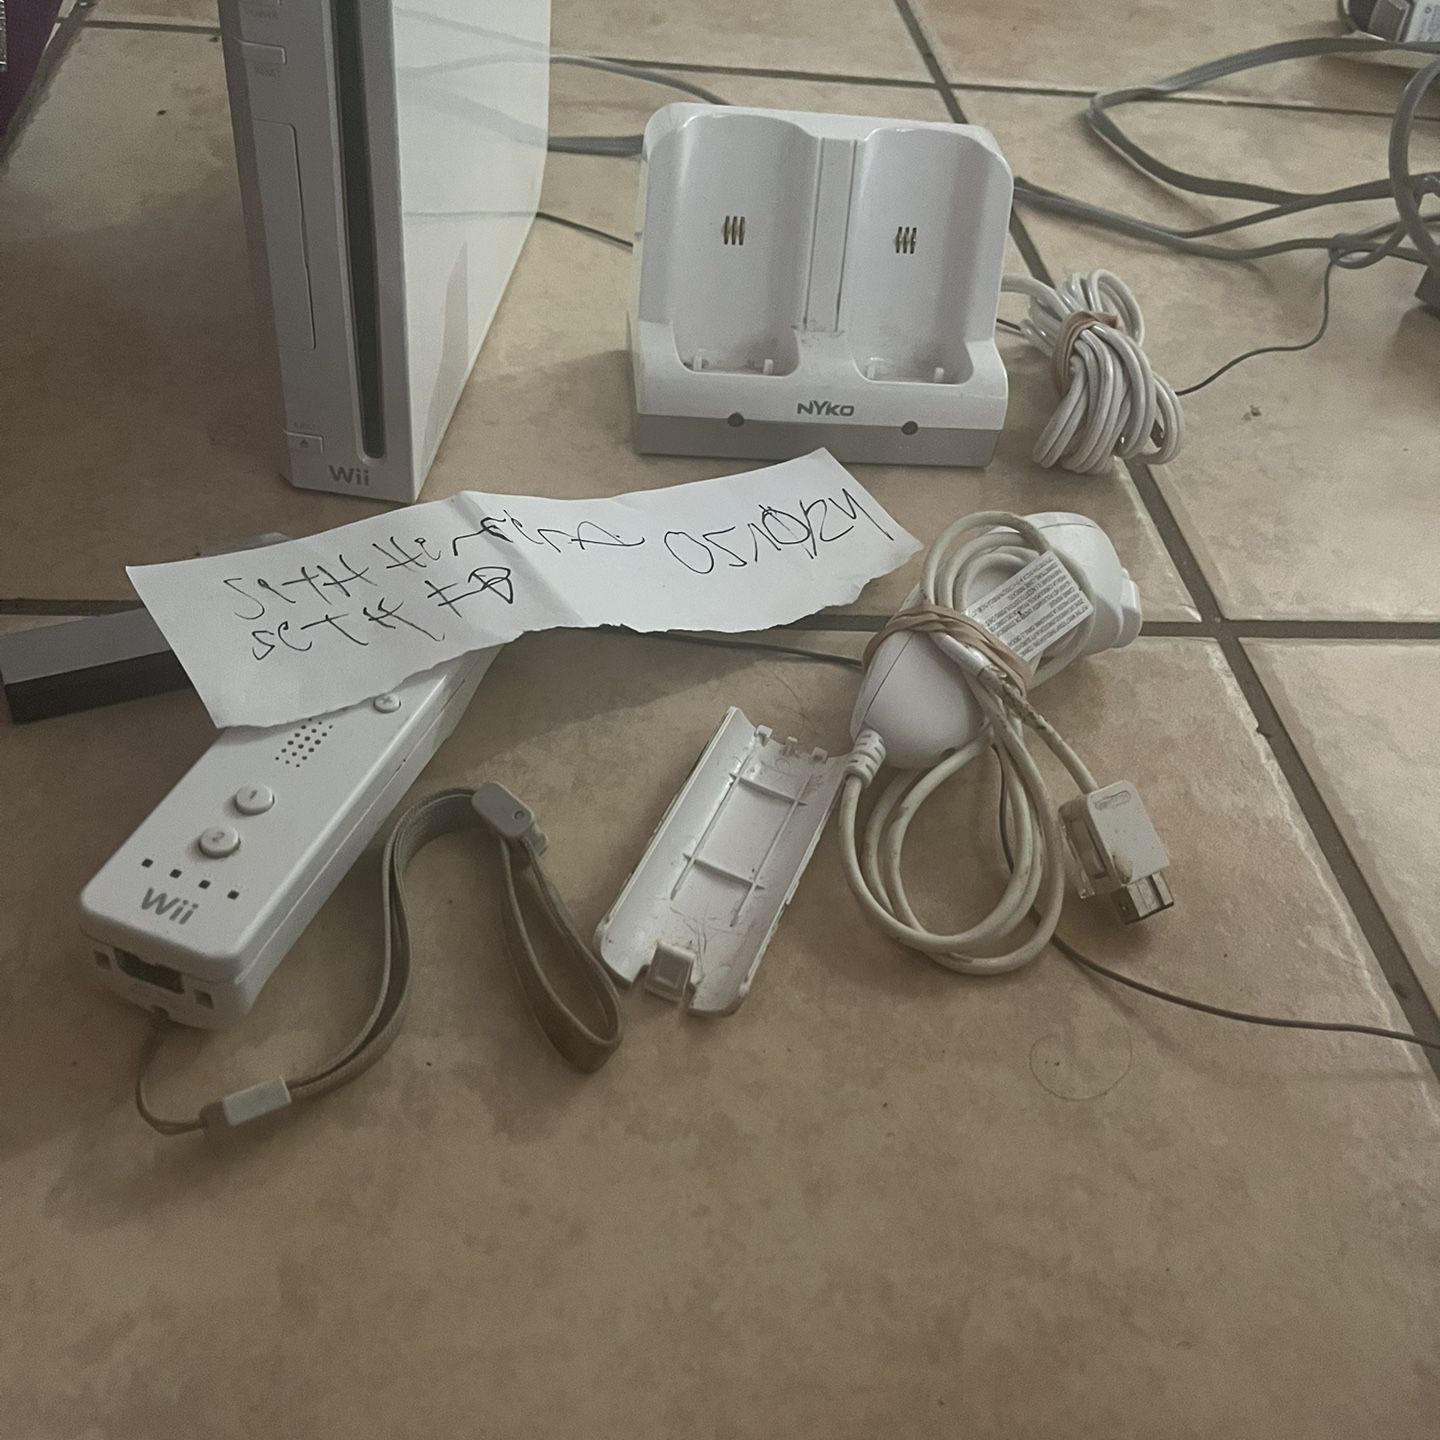  Nintendo Wii W/ Nunchuk, Remote, Remote Charger